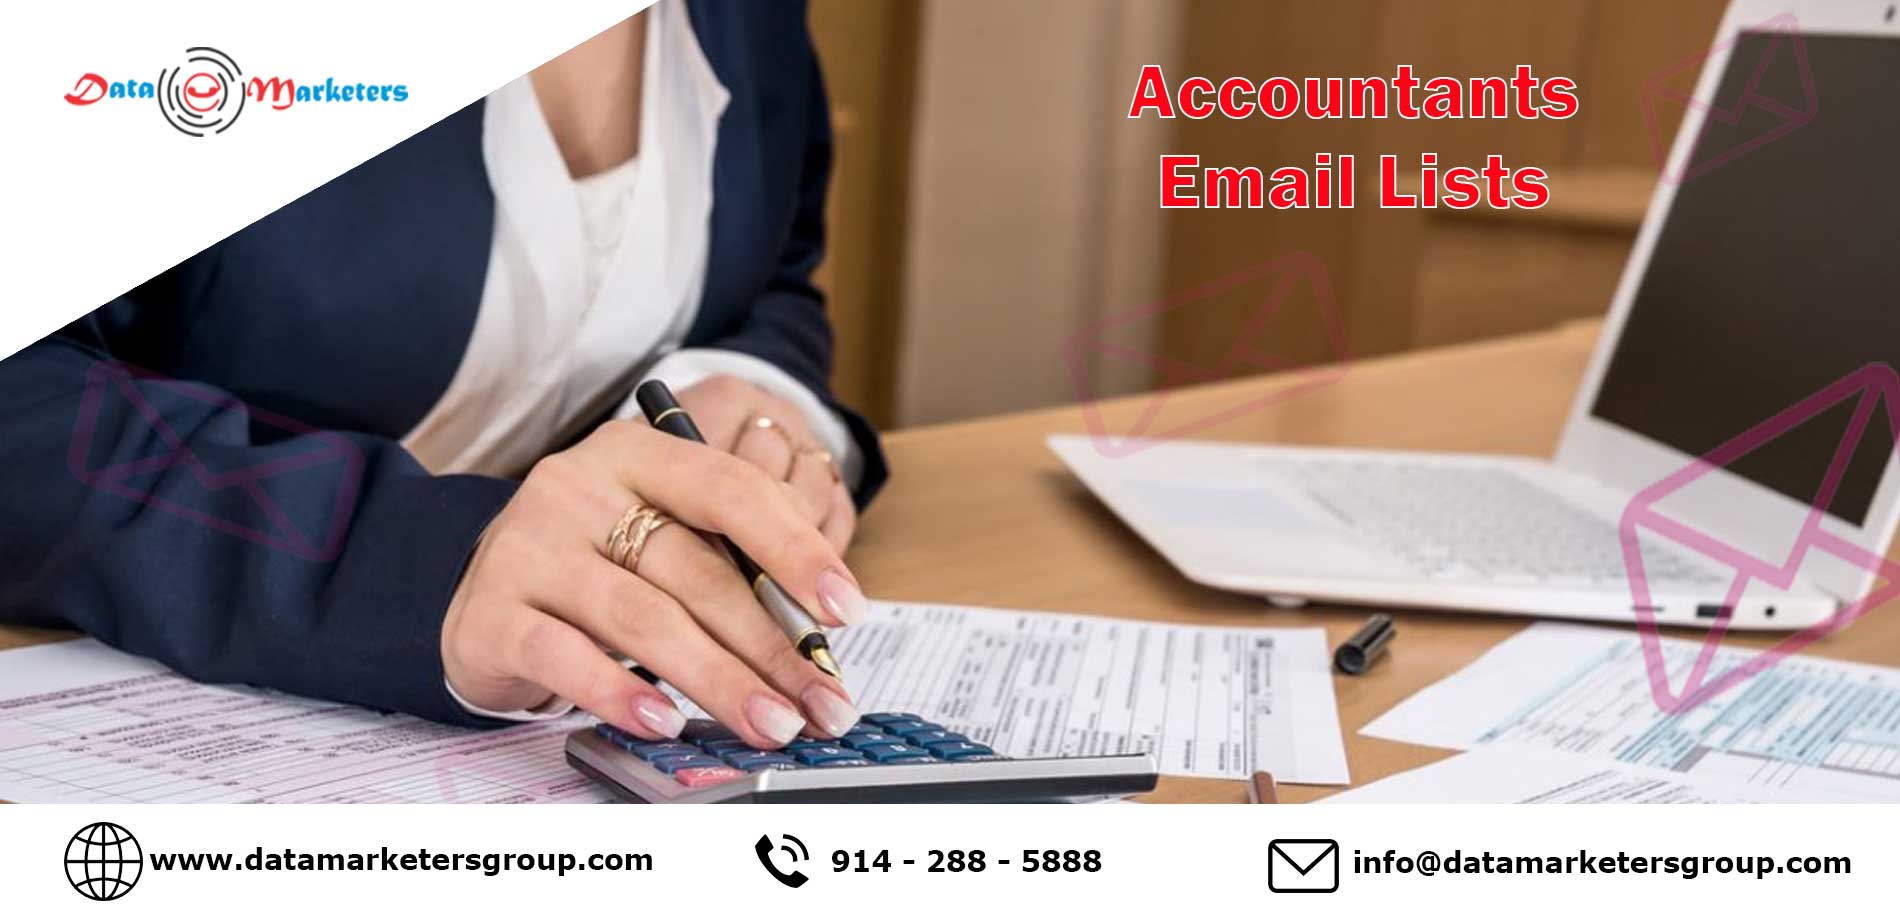 Accountants Email List | Accountants Mailing List | Data Marketers Group